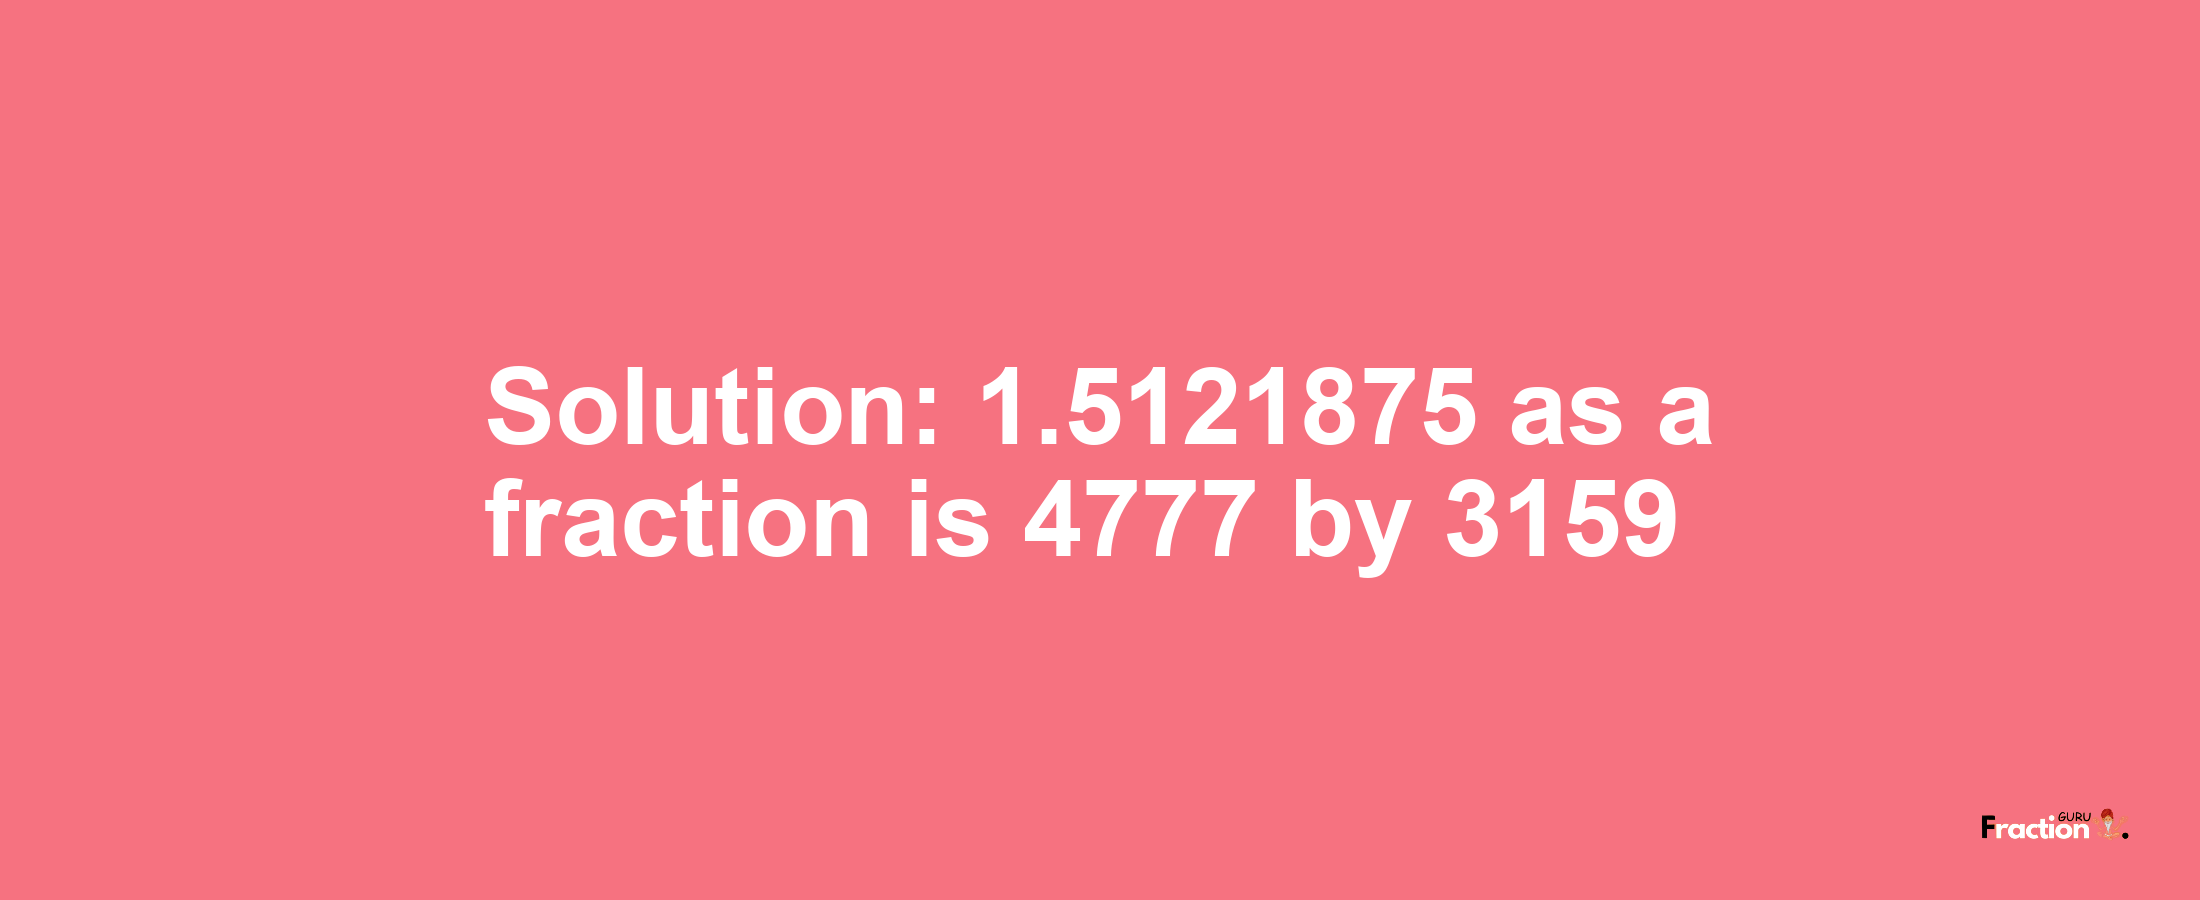 Solution:1.5121875 as a fraction is 4777/3159